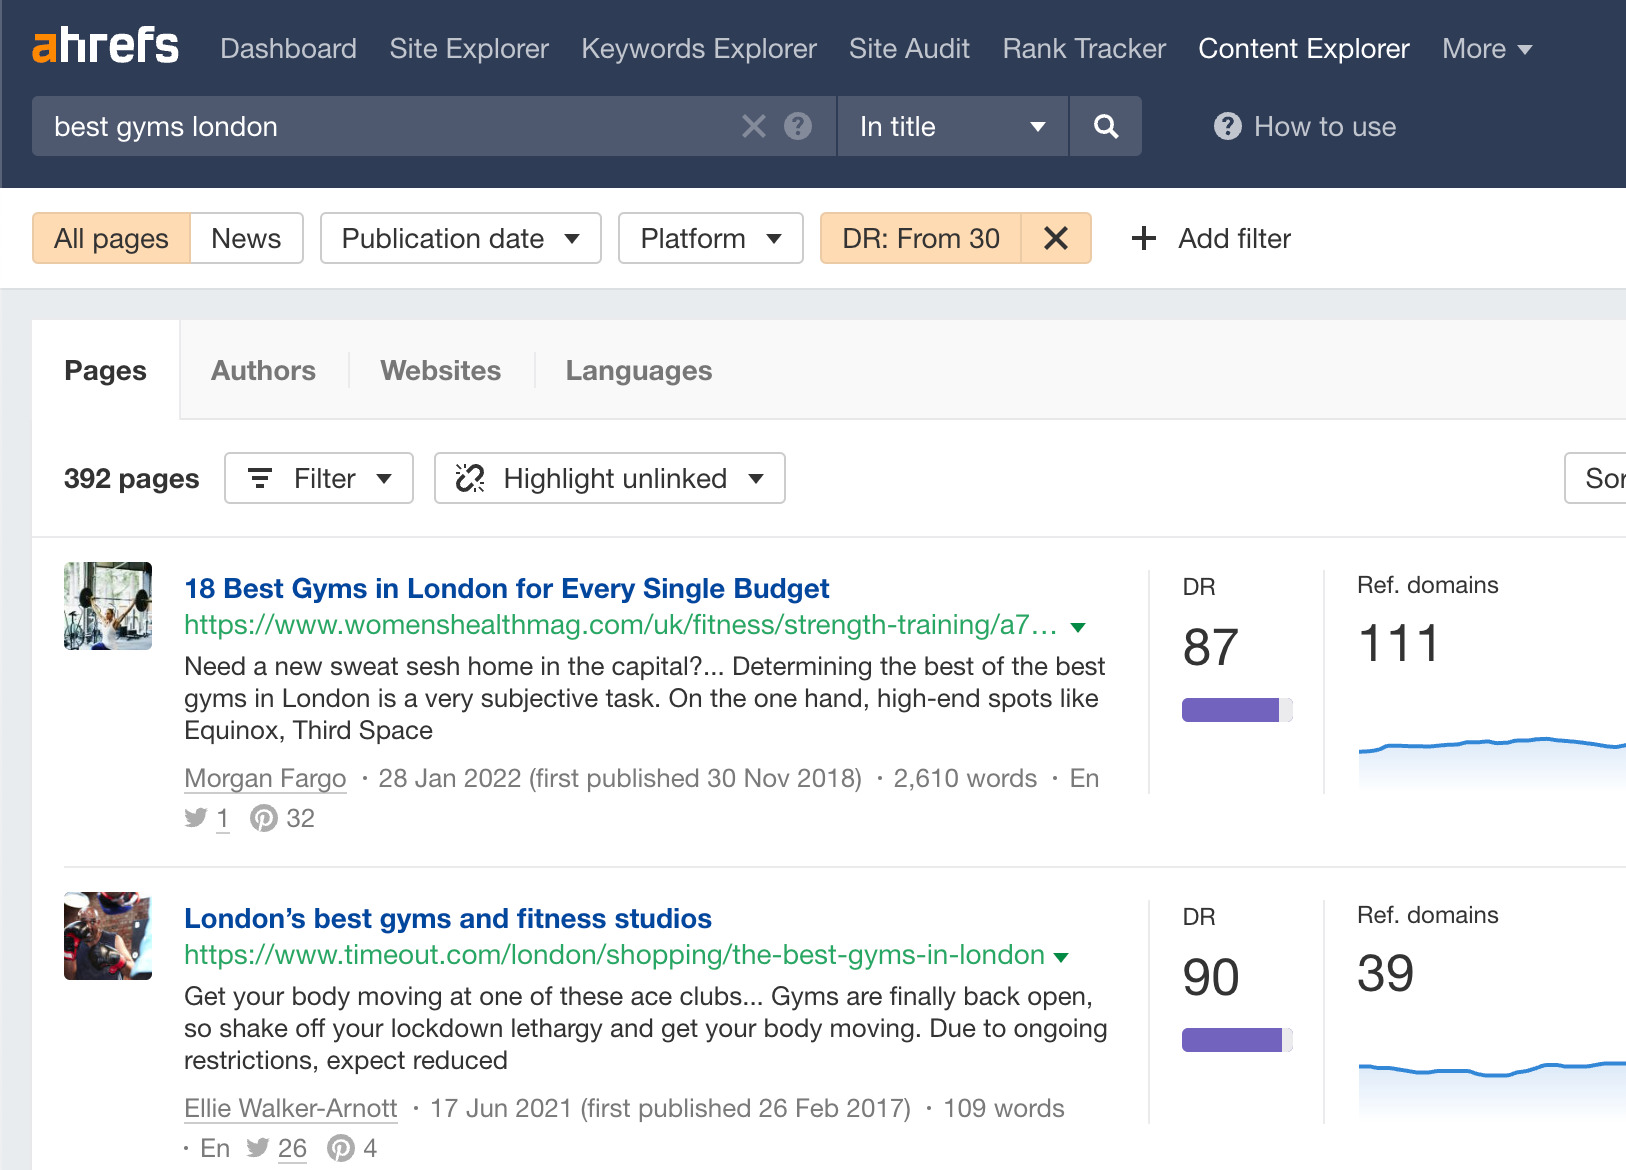 Using Ahrefs' Content Explorer to find pages listing the best gyms in London
